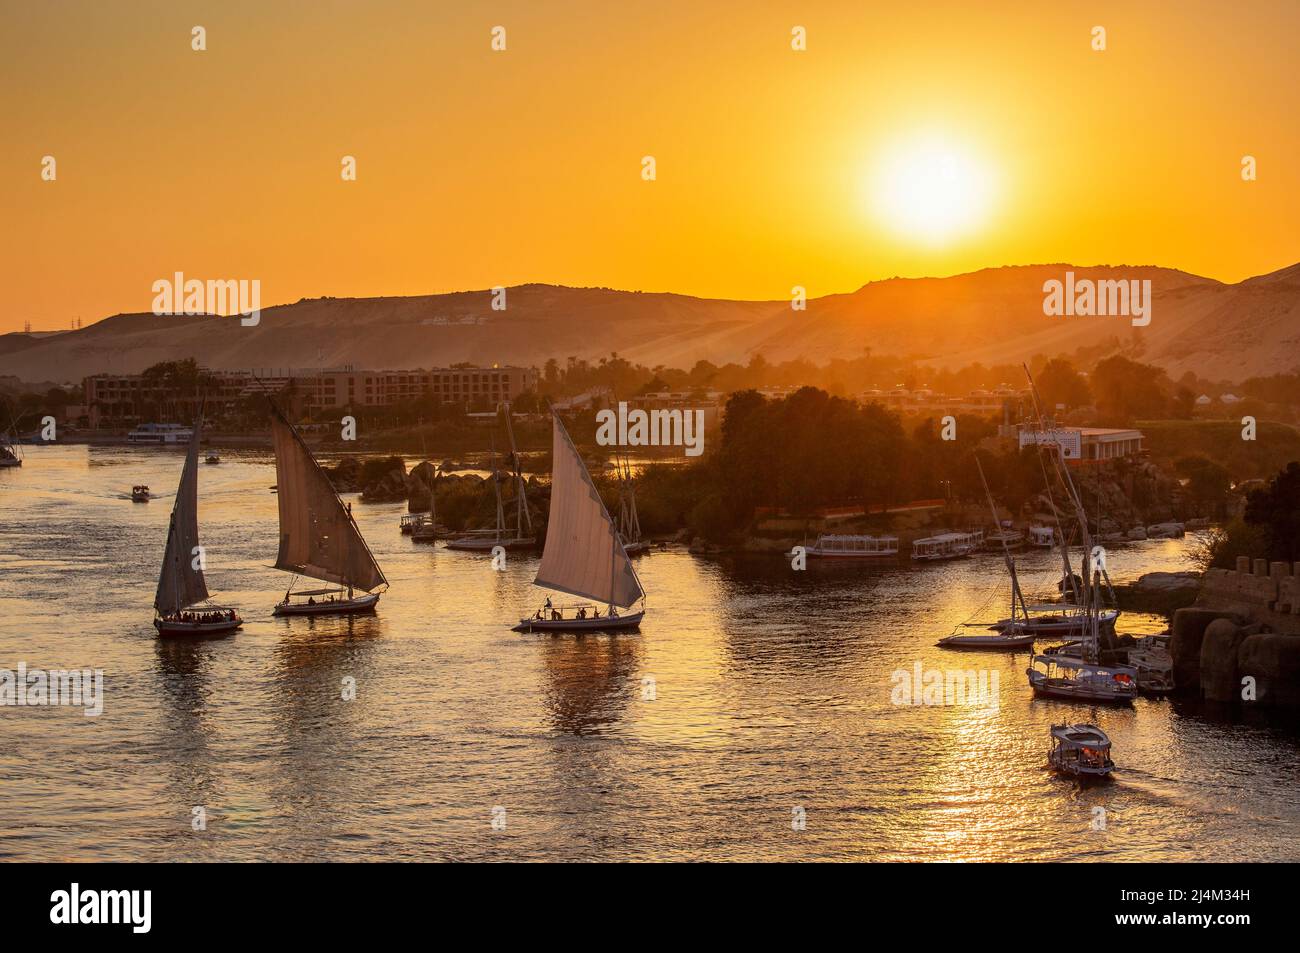 felucca boats on Nile river at sunset Stock Photo